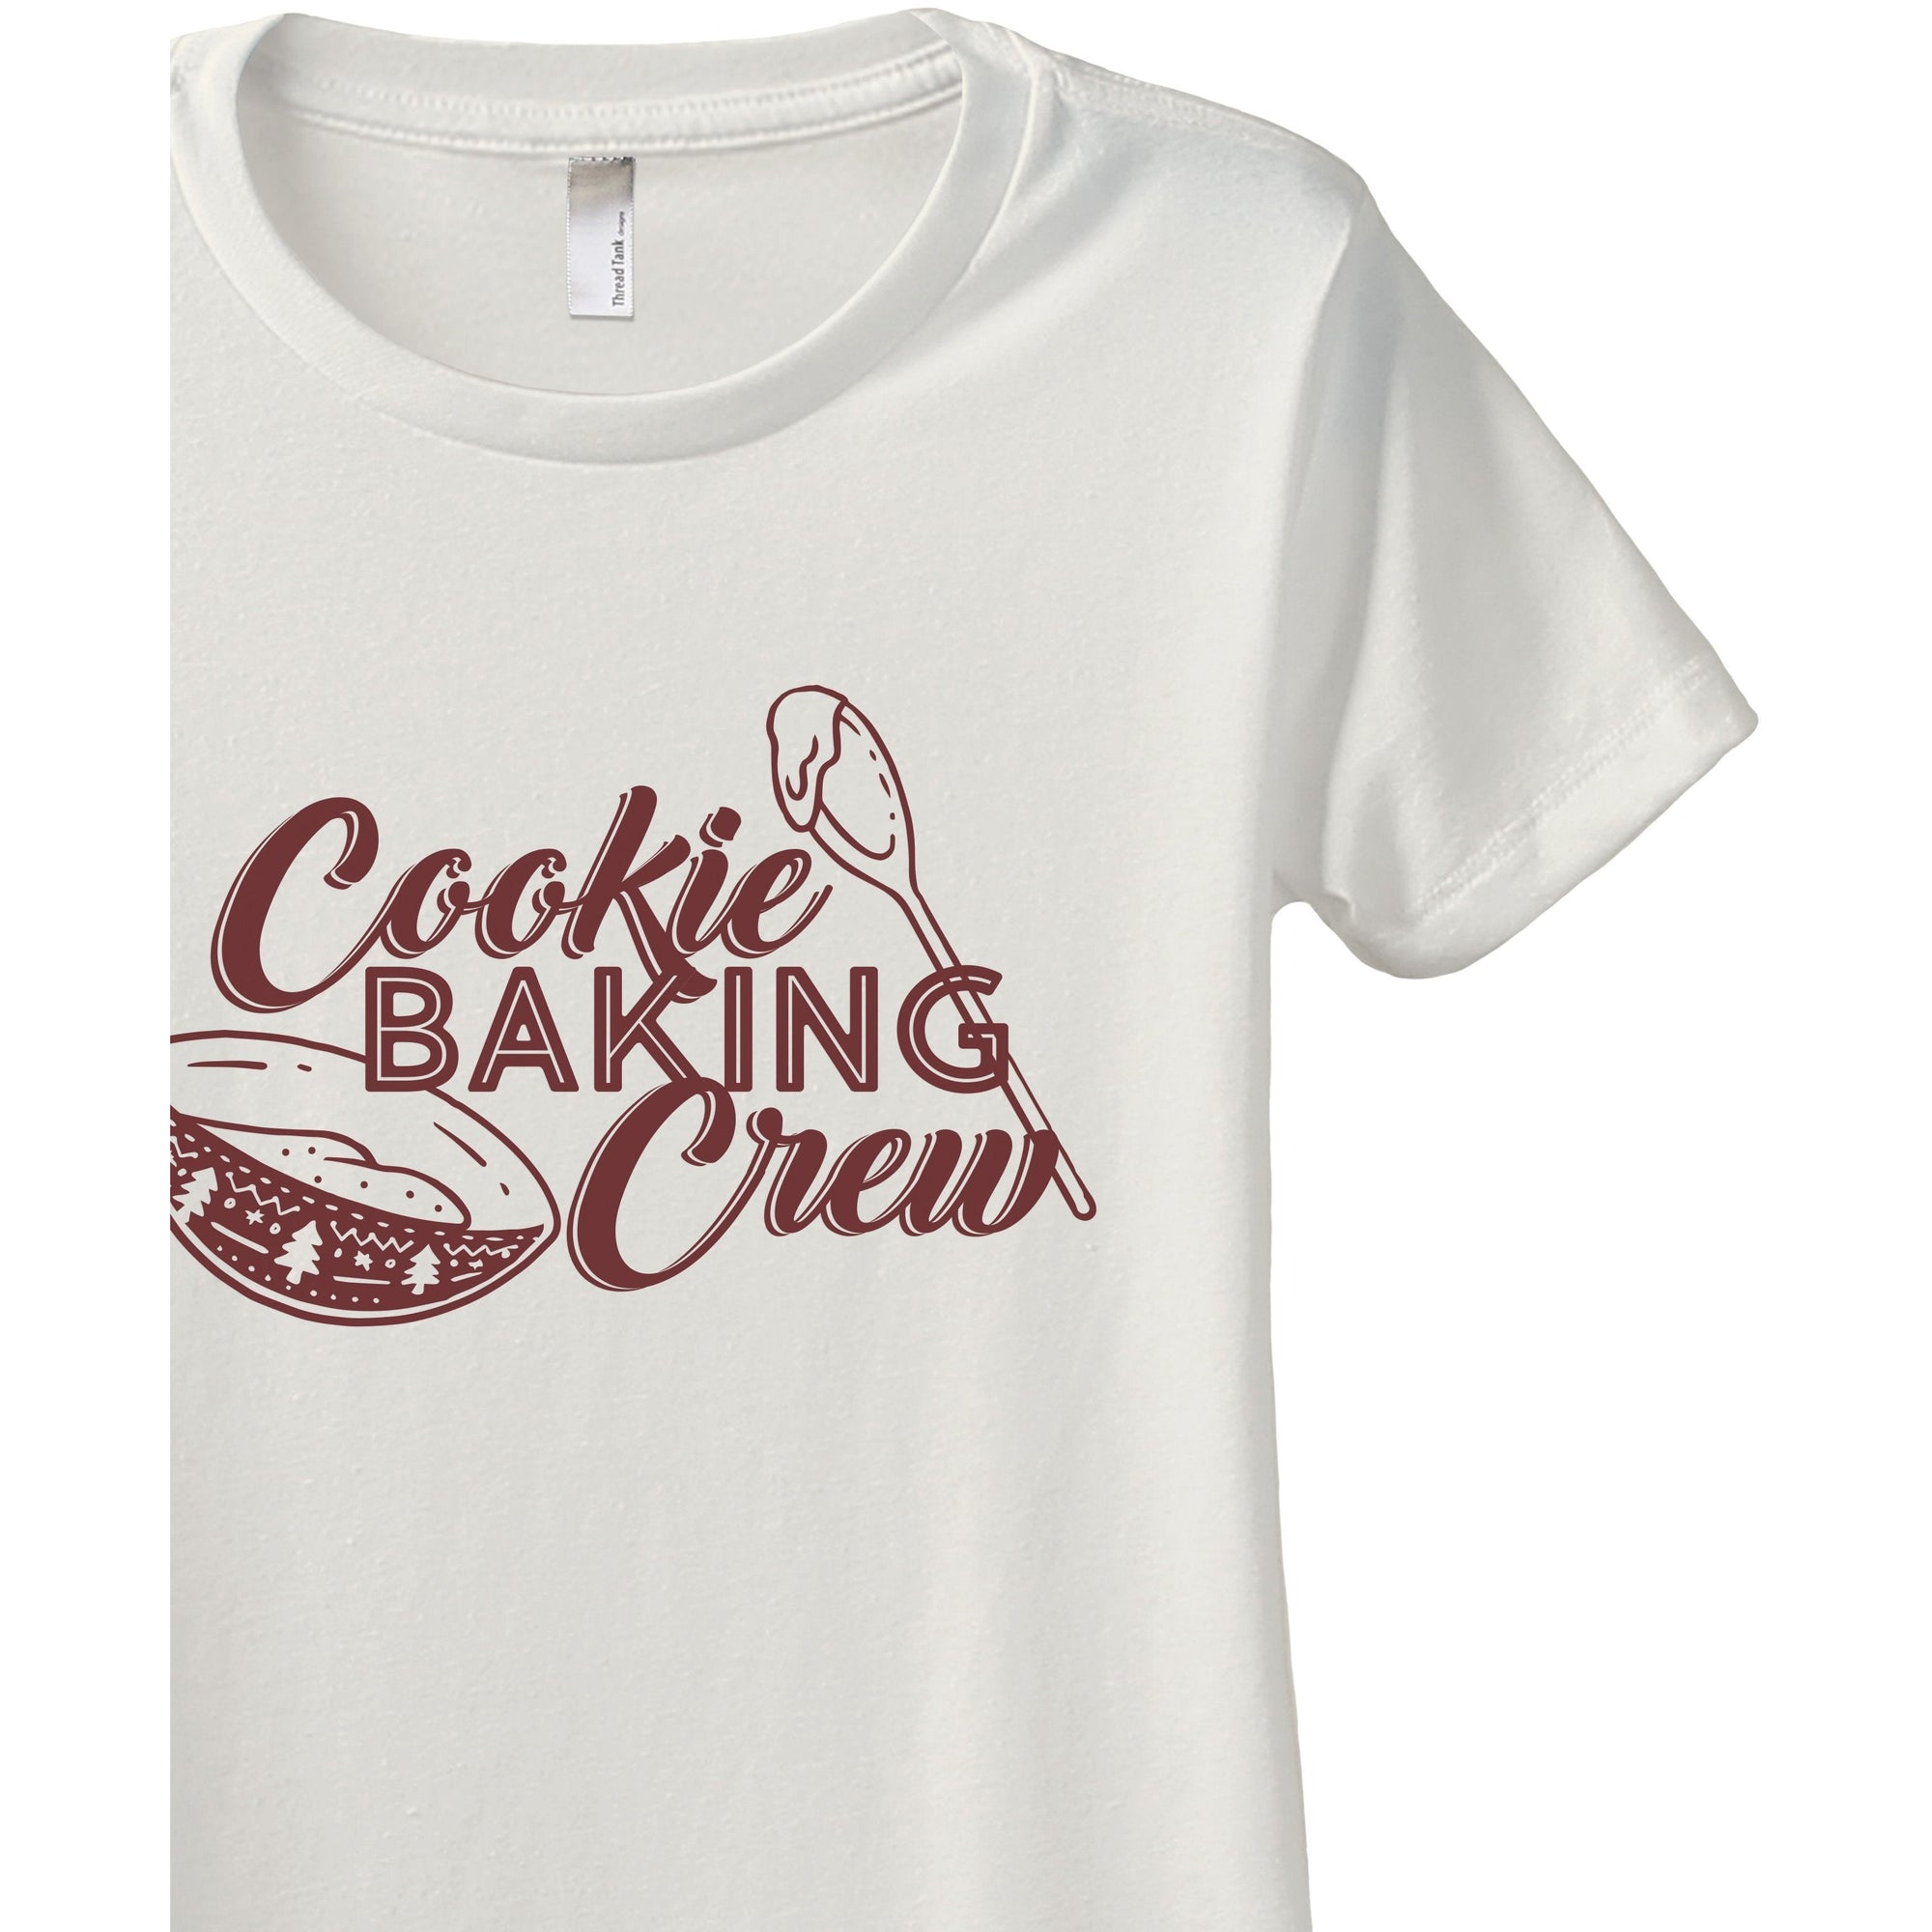 Cookie Baking Crew Women's Relaxed Crewneck T-Shirt Top Tee Vintage White Scarlet Zoom Details